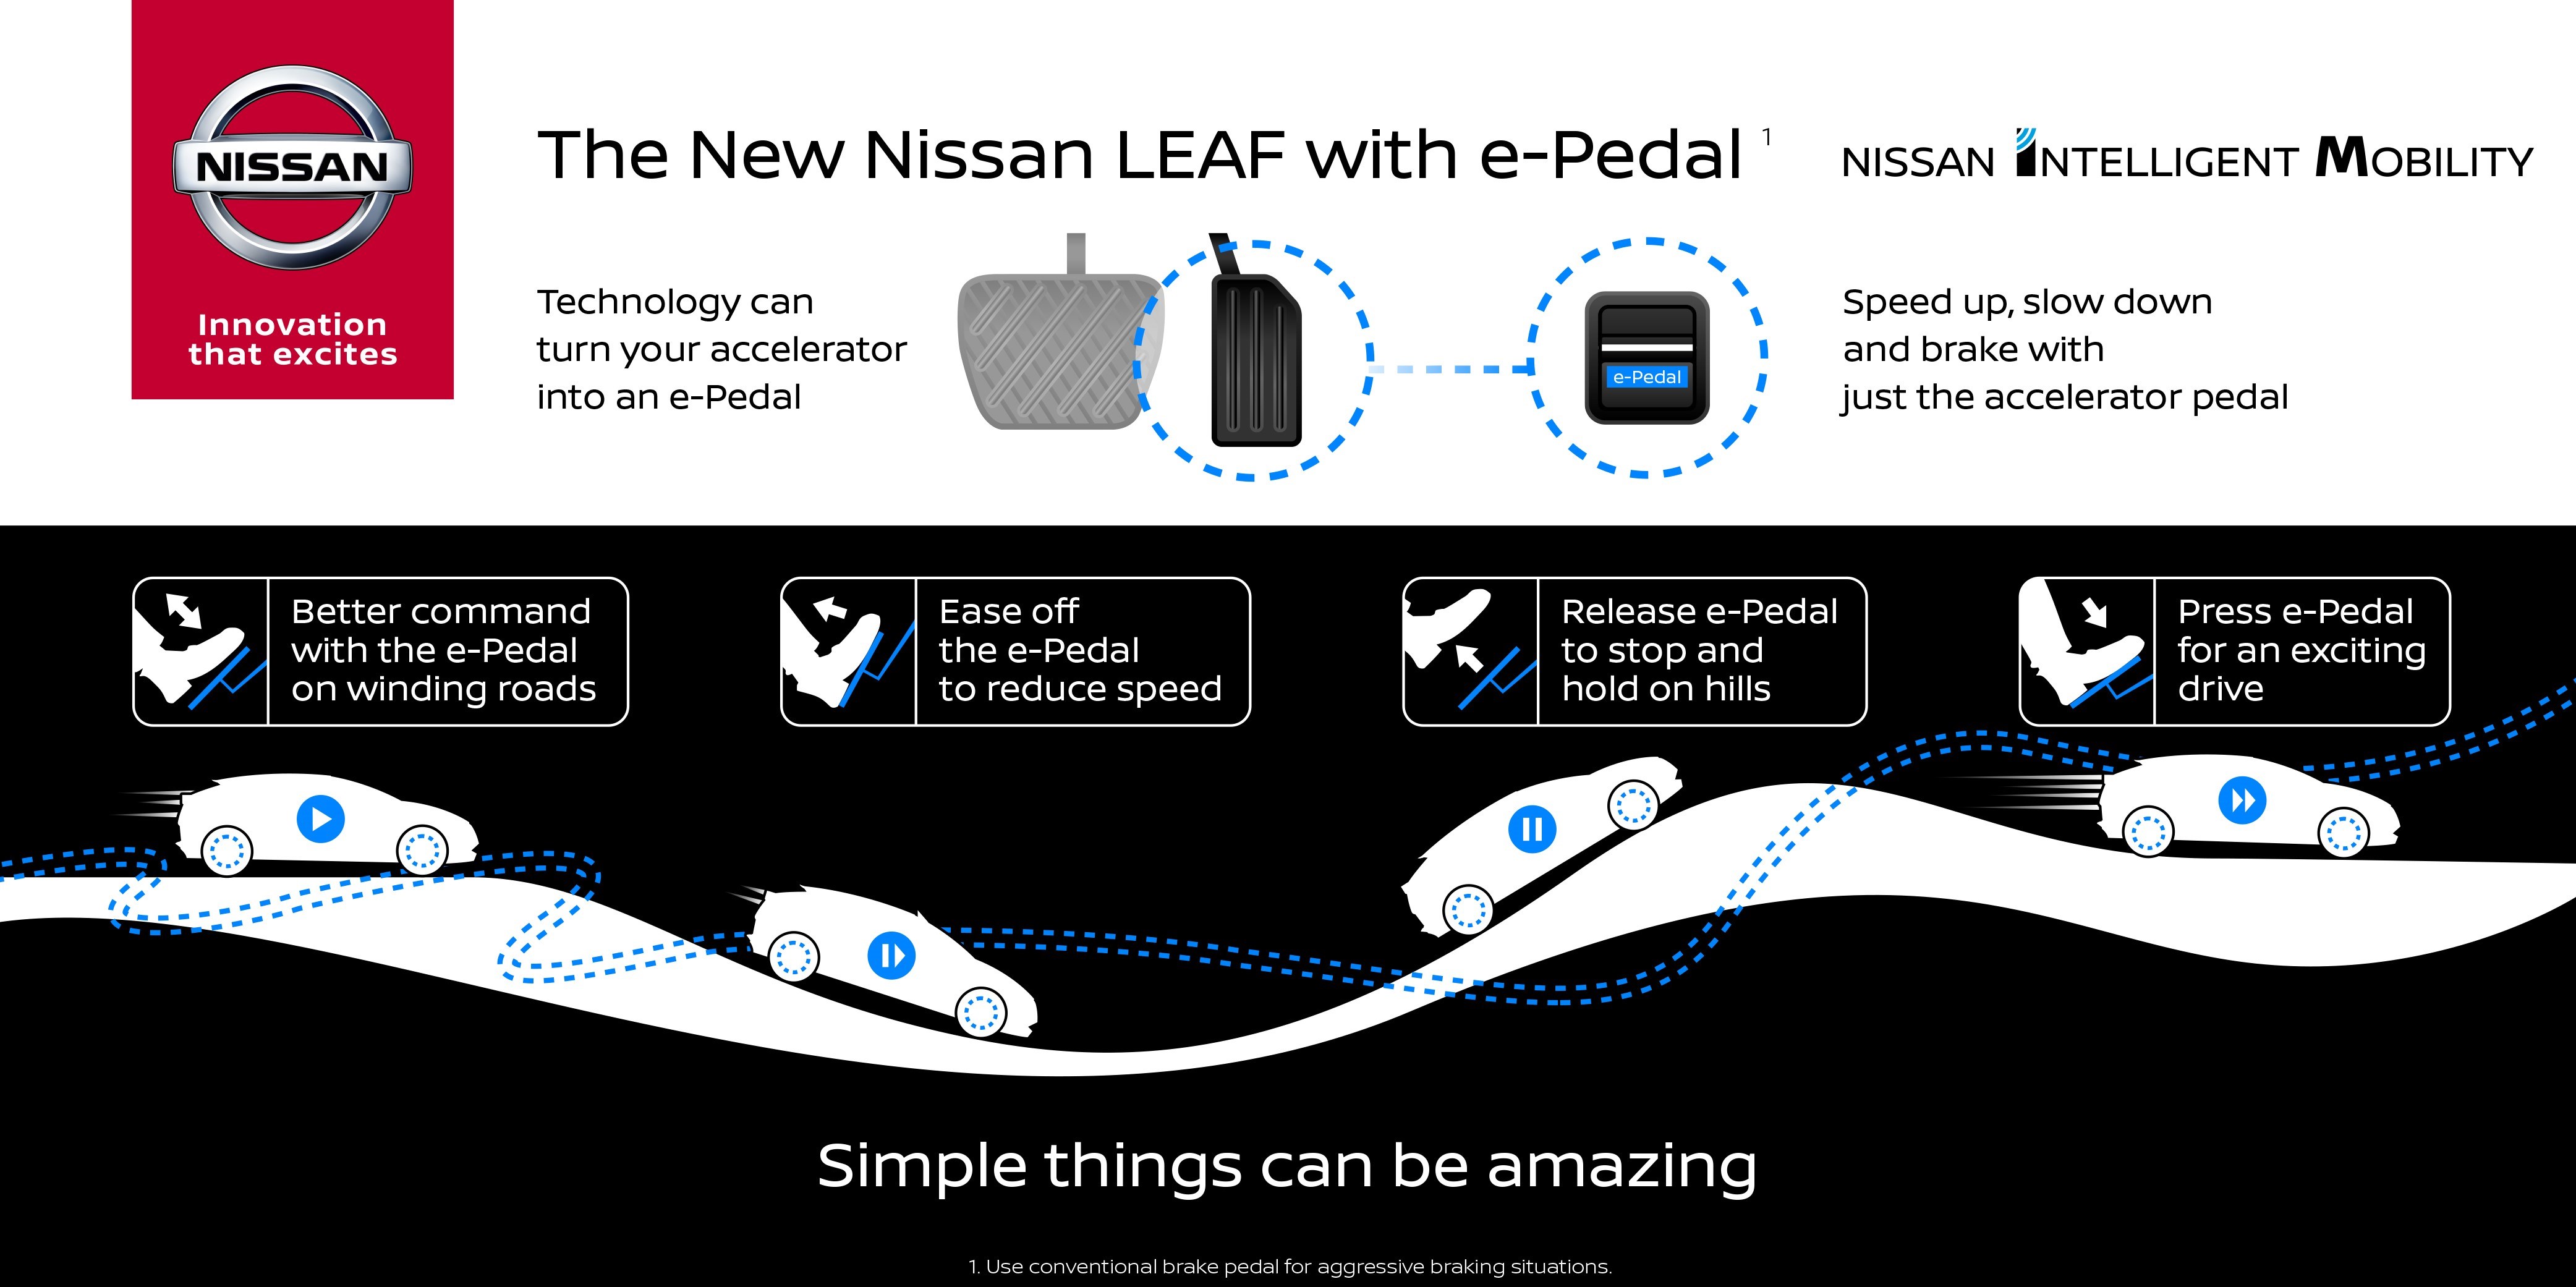 Nissan to Introduce Revolutionary e-Pedal Technology in New LEAF